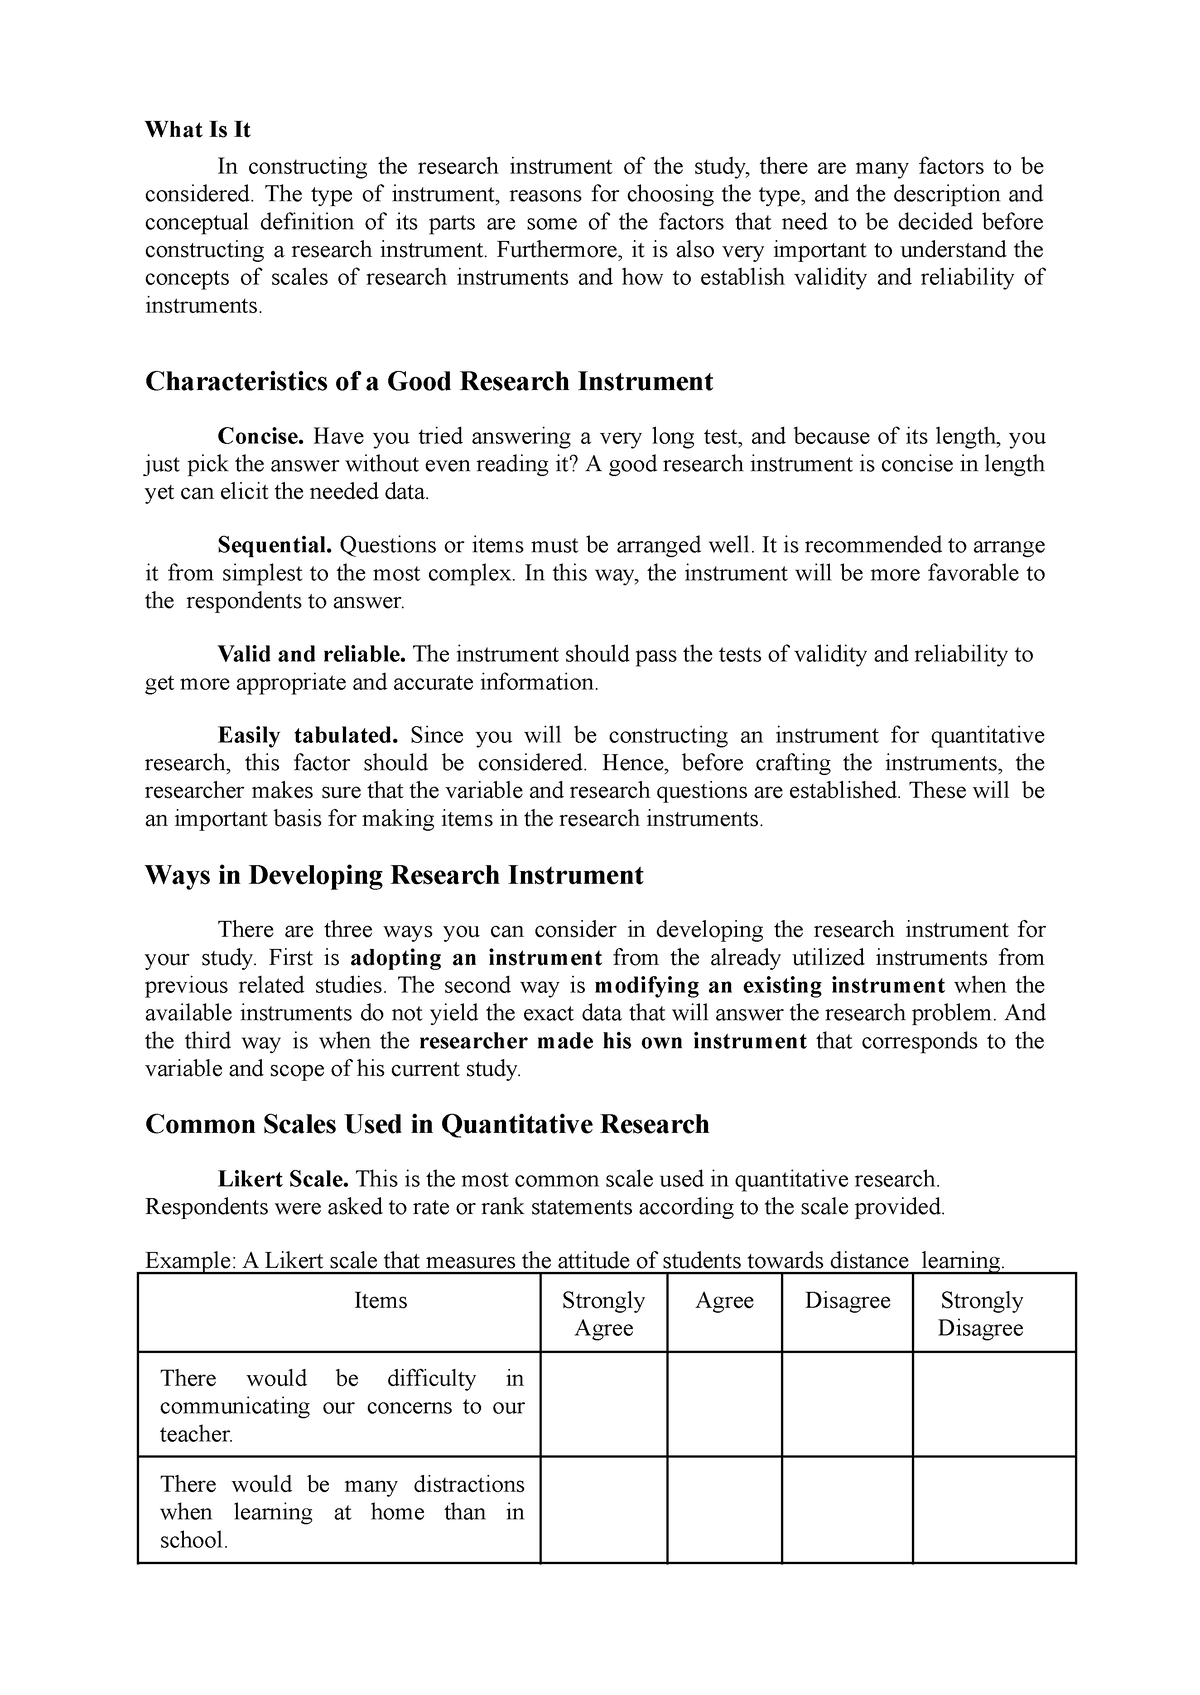 what makes a research instrument valid